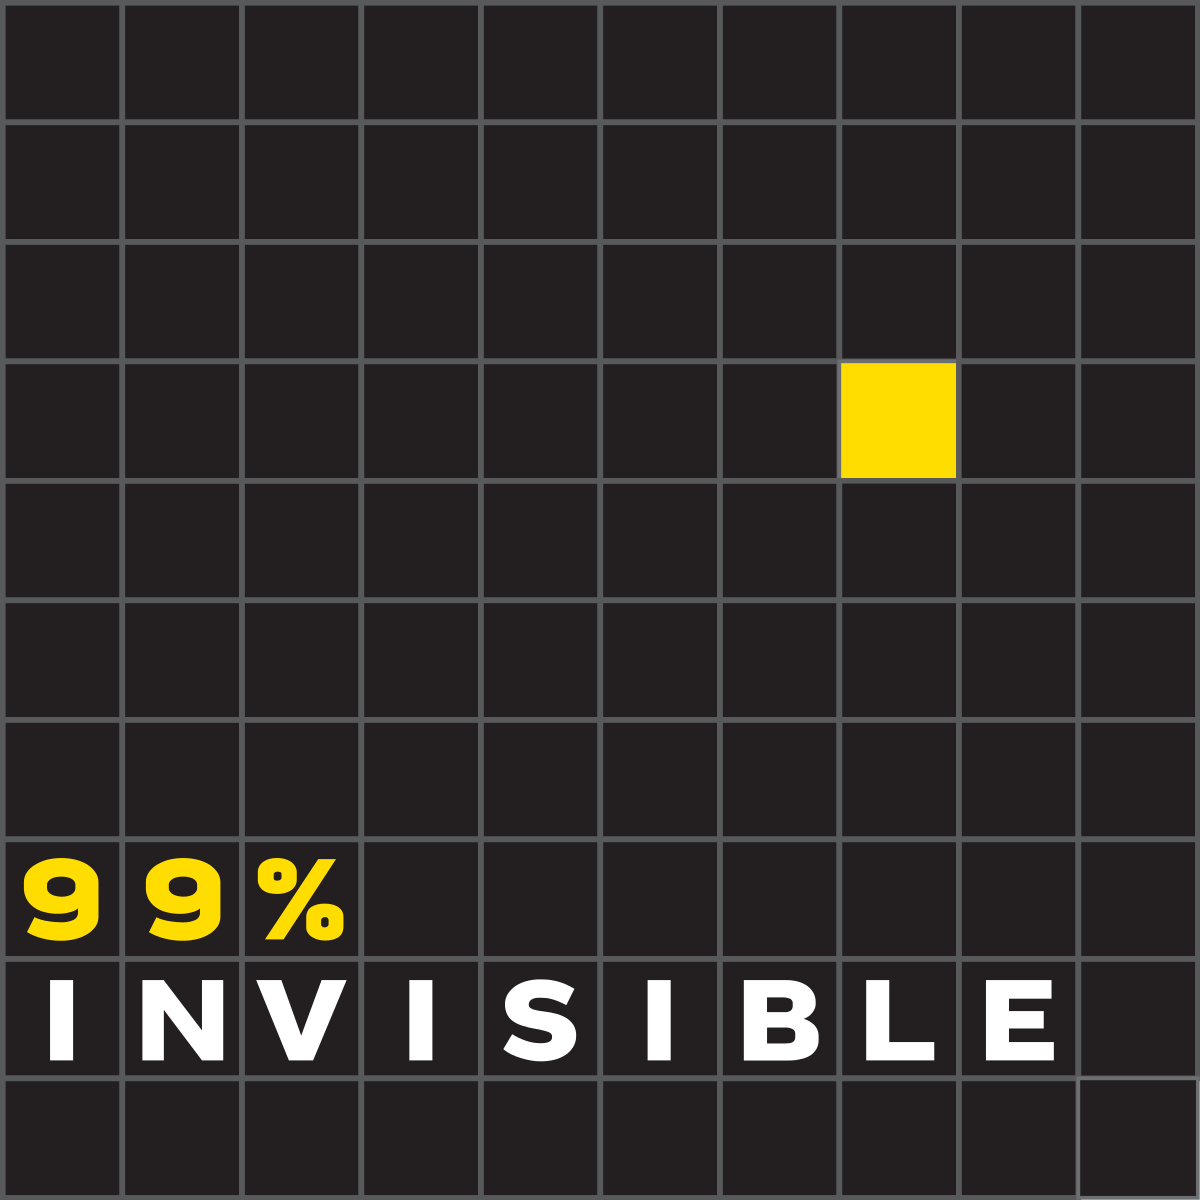 99% Invisible: a top design podcast by Roman Mars